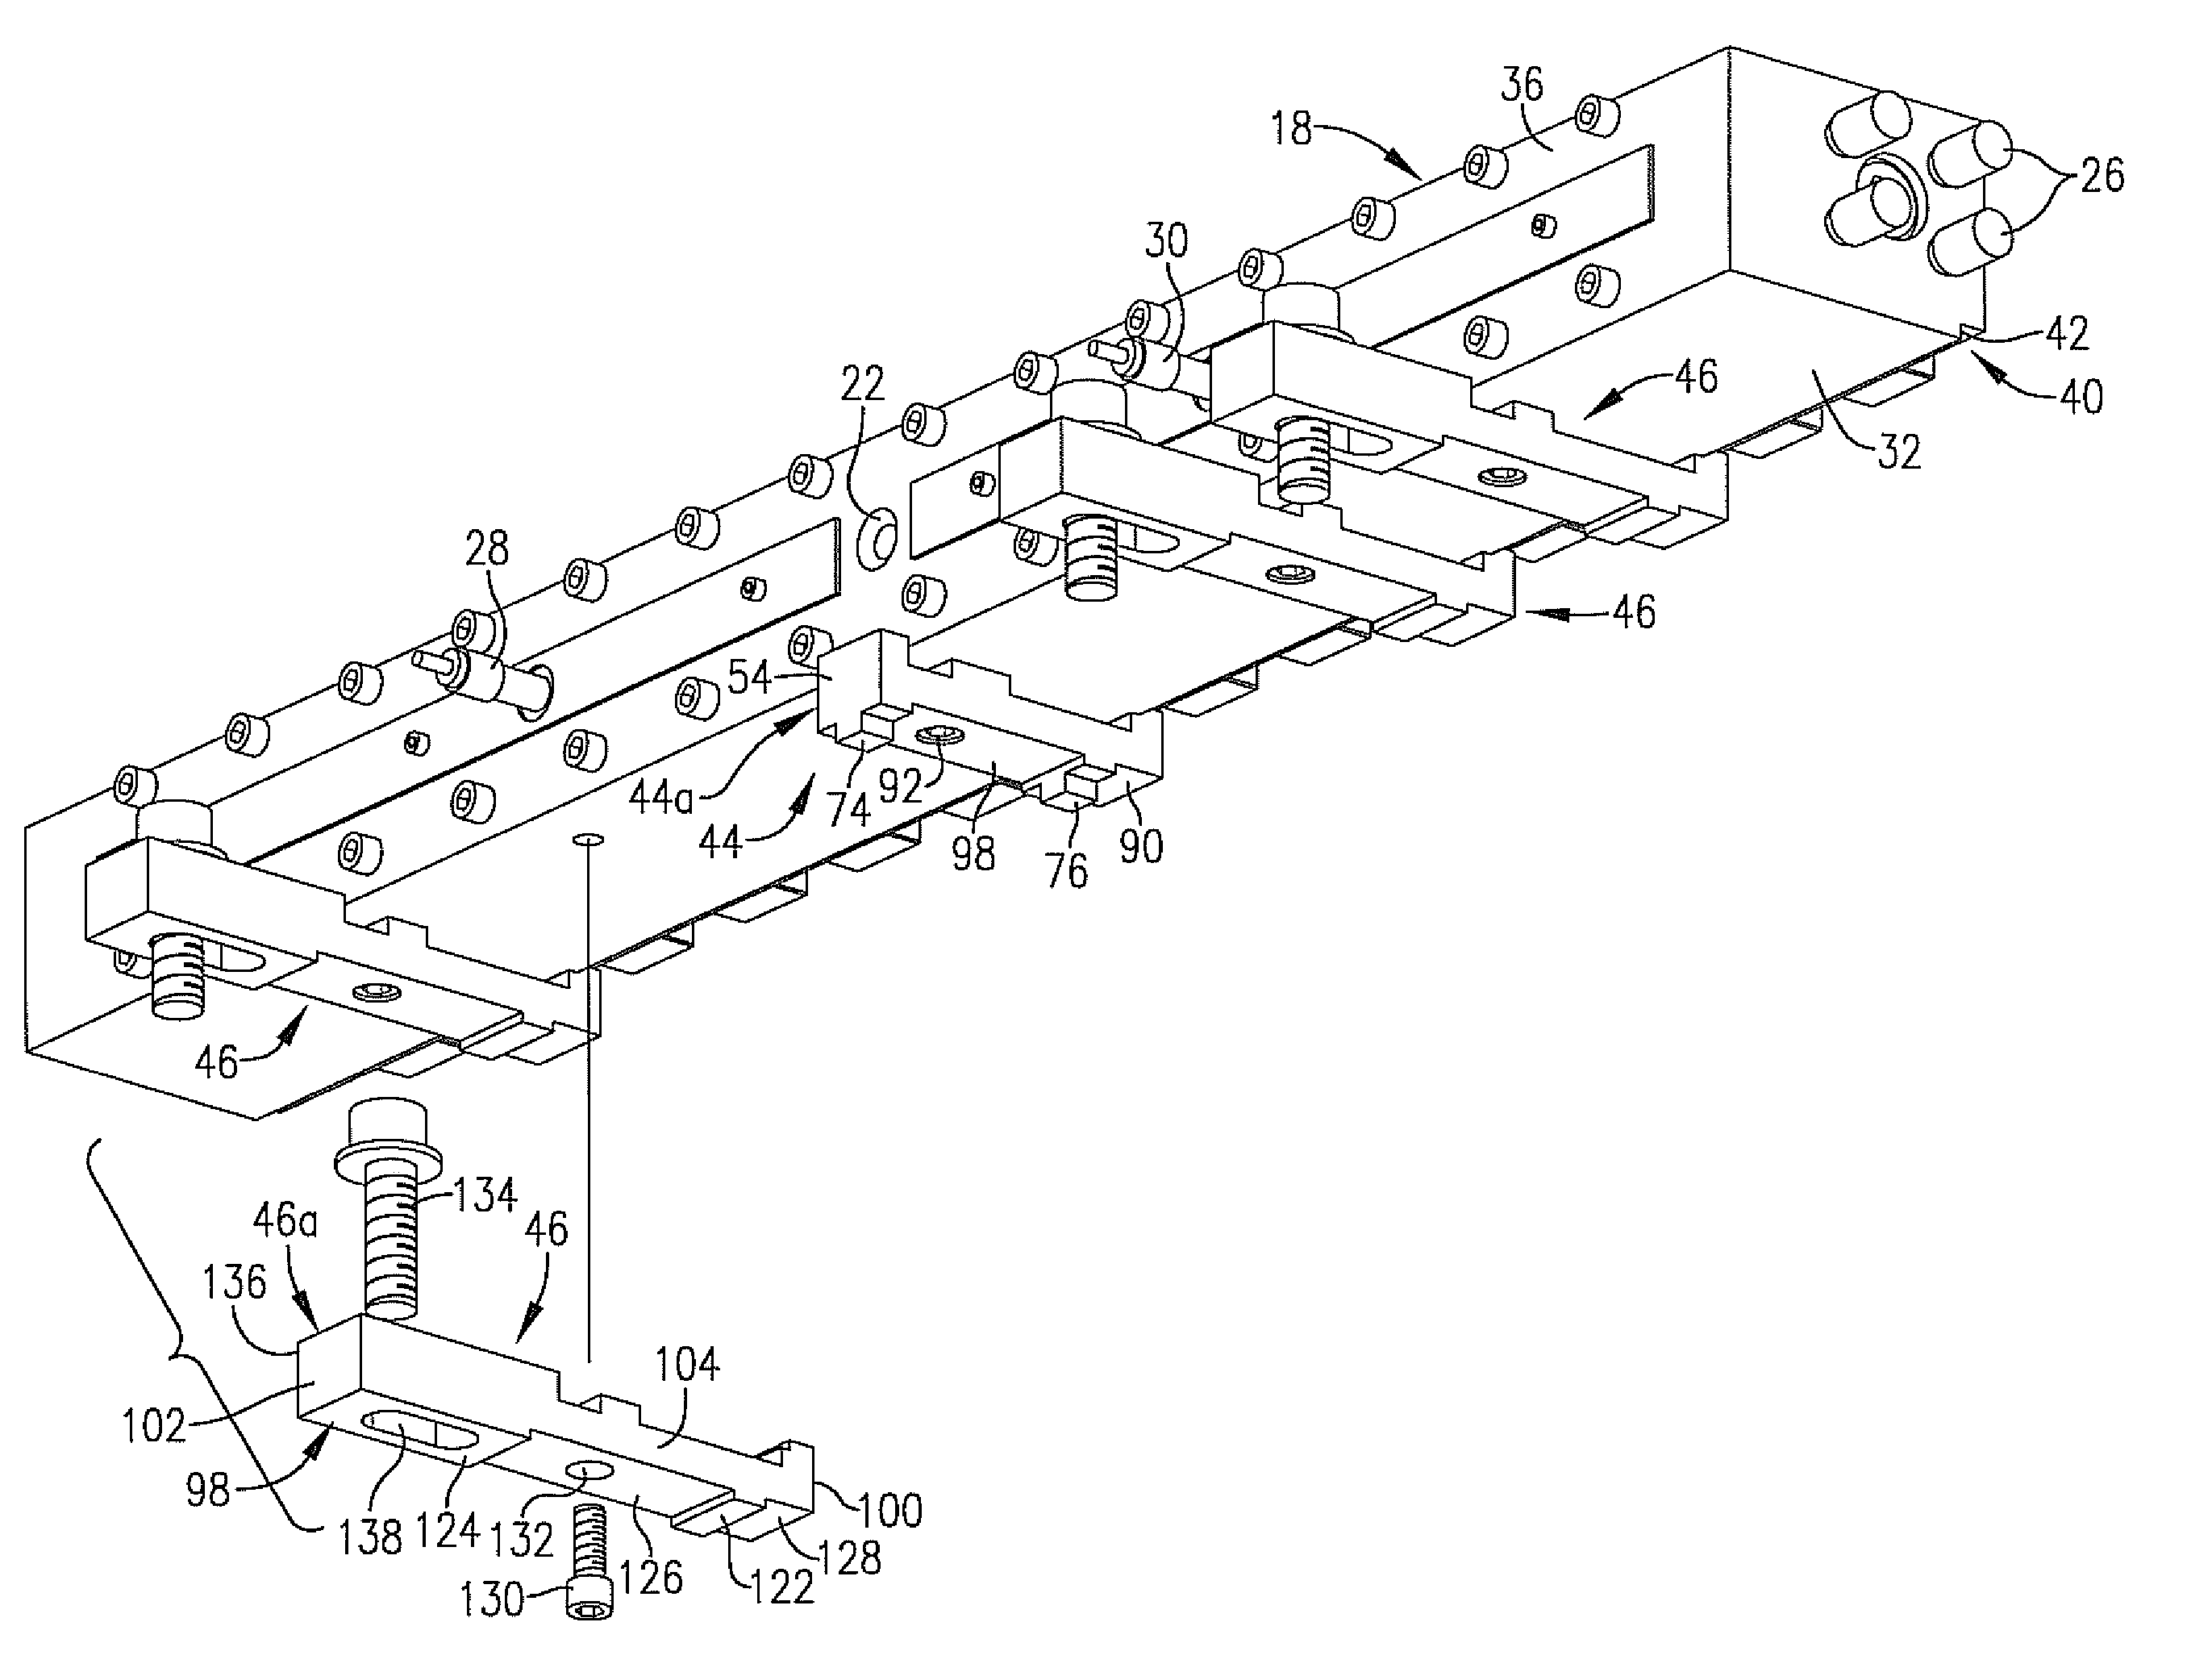 Universal mounting brackets for attaching a hot injection manifold to the lower die set of an injection blow molding machine